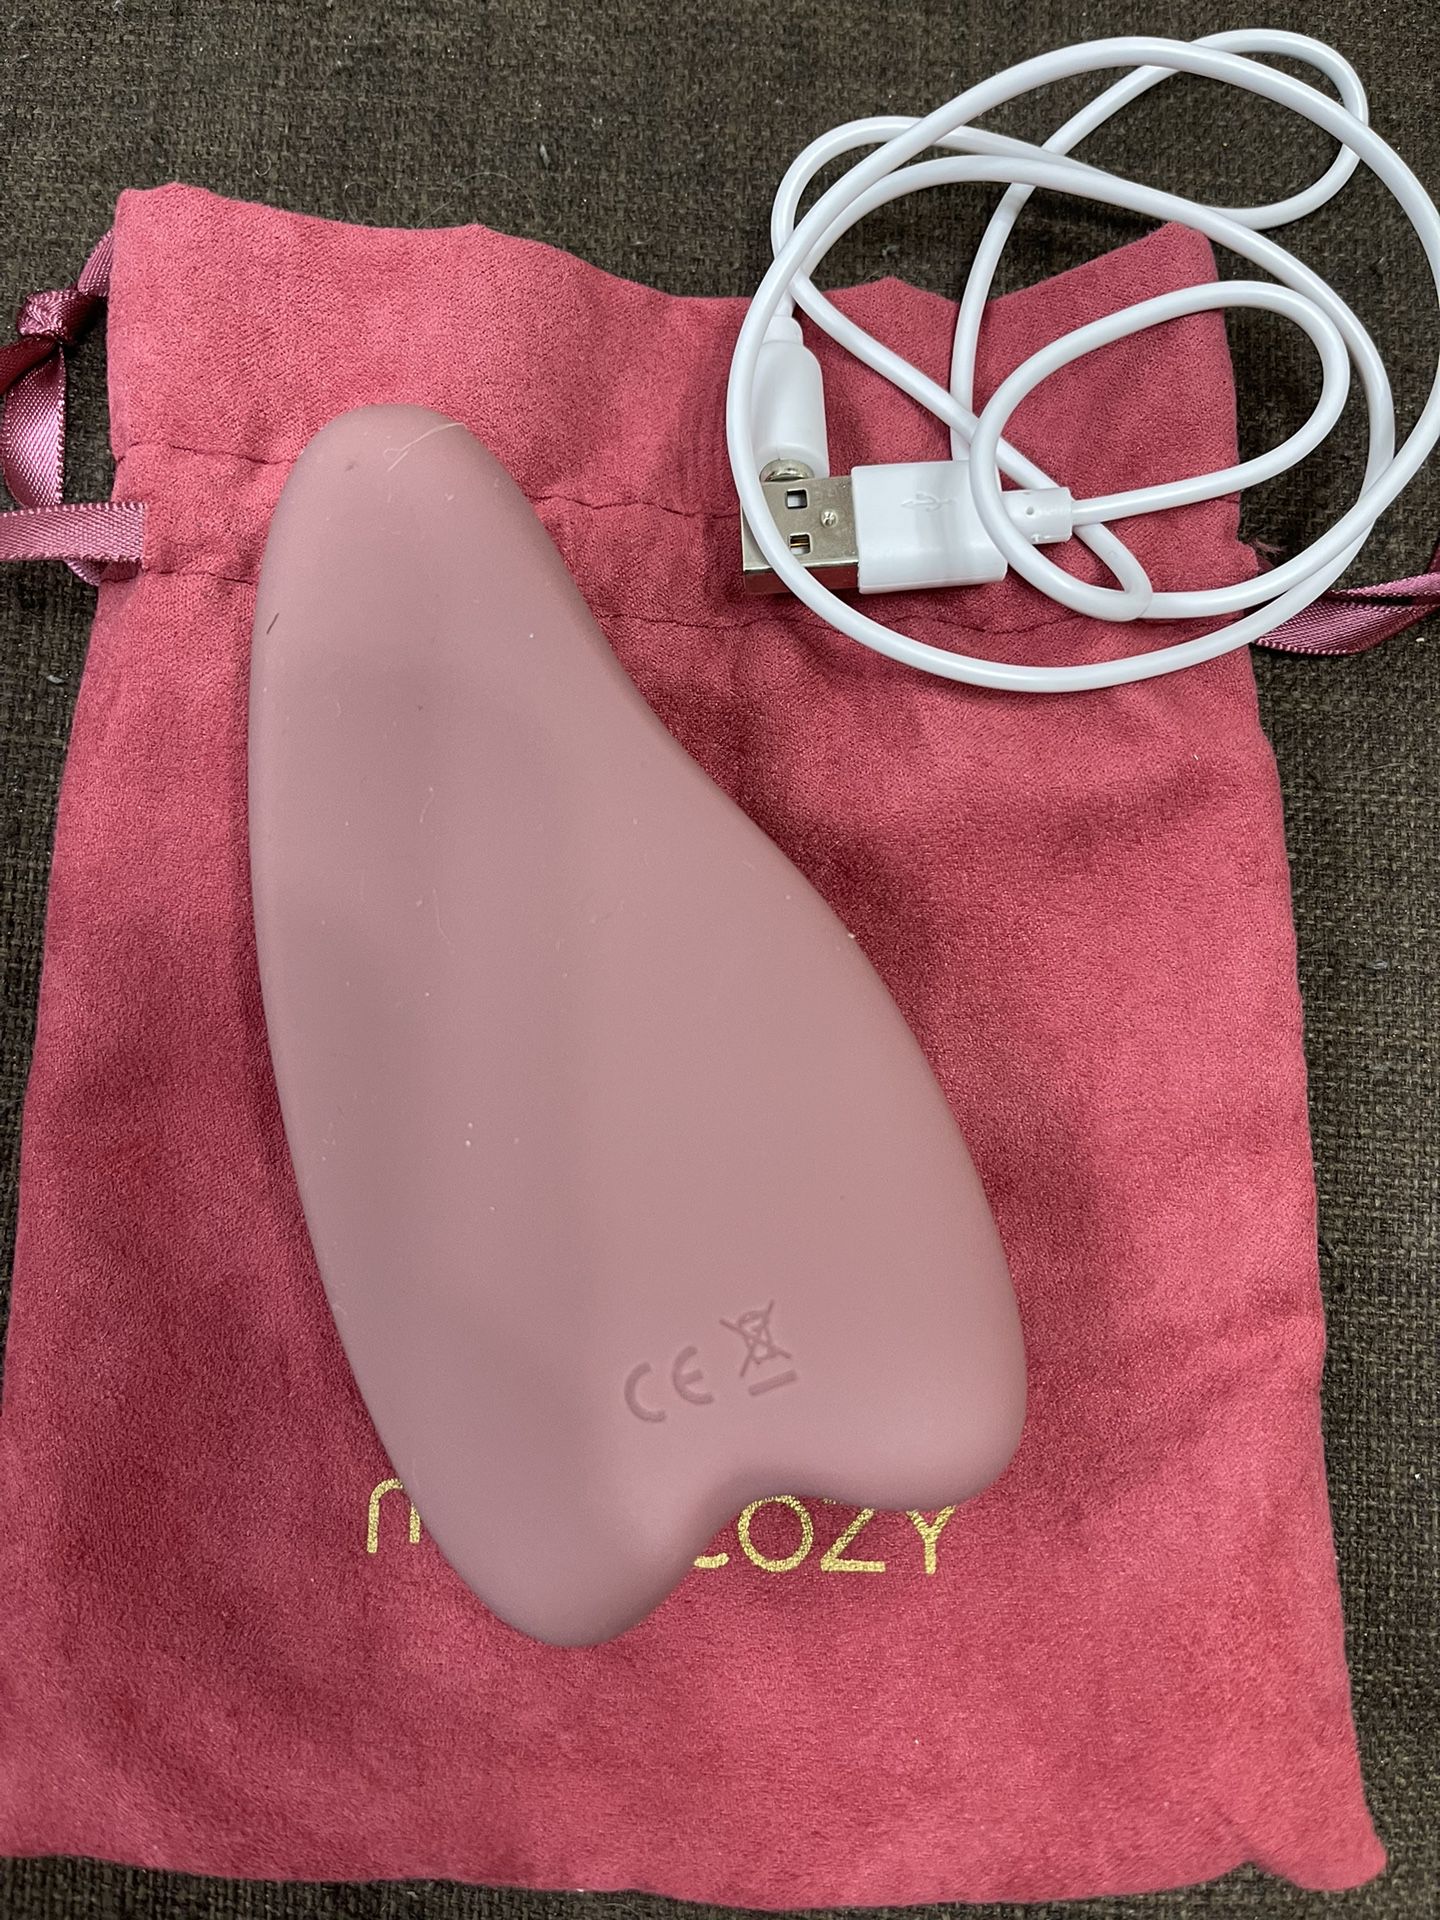 Momcozy Warming Lactation Massager 2-in-1, Soft Breast Massager for  Breastfeeding, Heat + Vibration Adjustable for Clogged Ducts, Improve Milk  Flow